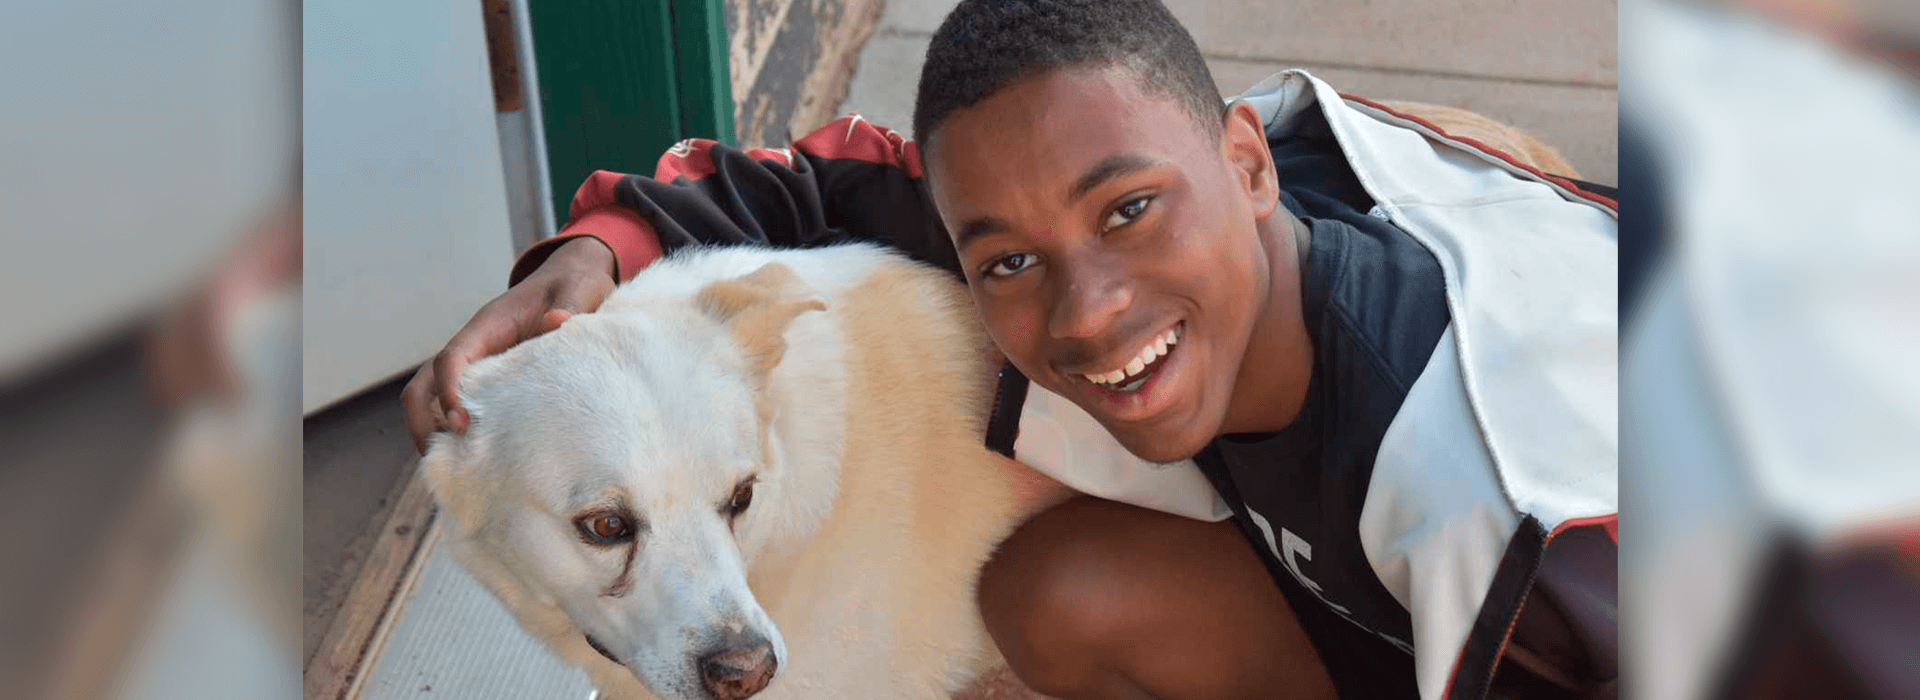 A boy smiling with his arm around a dog